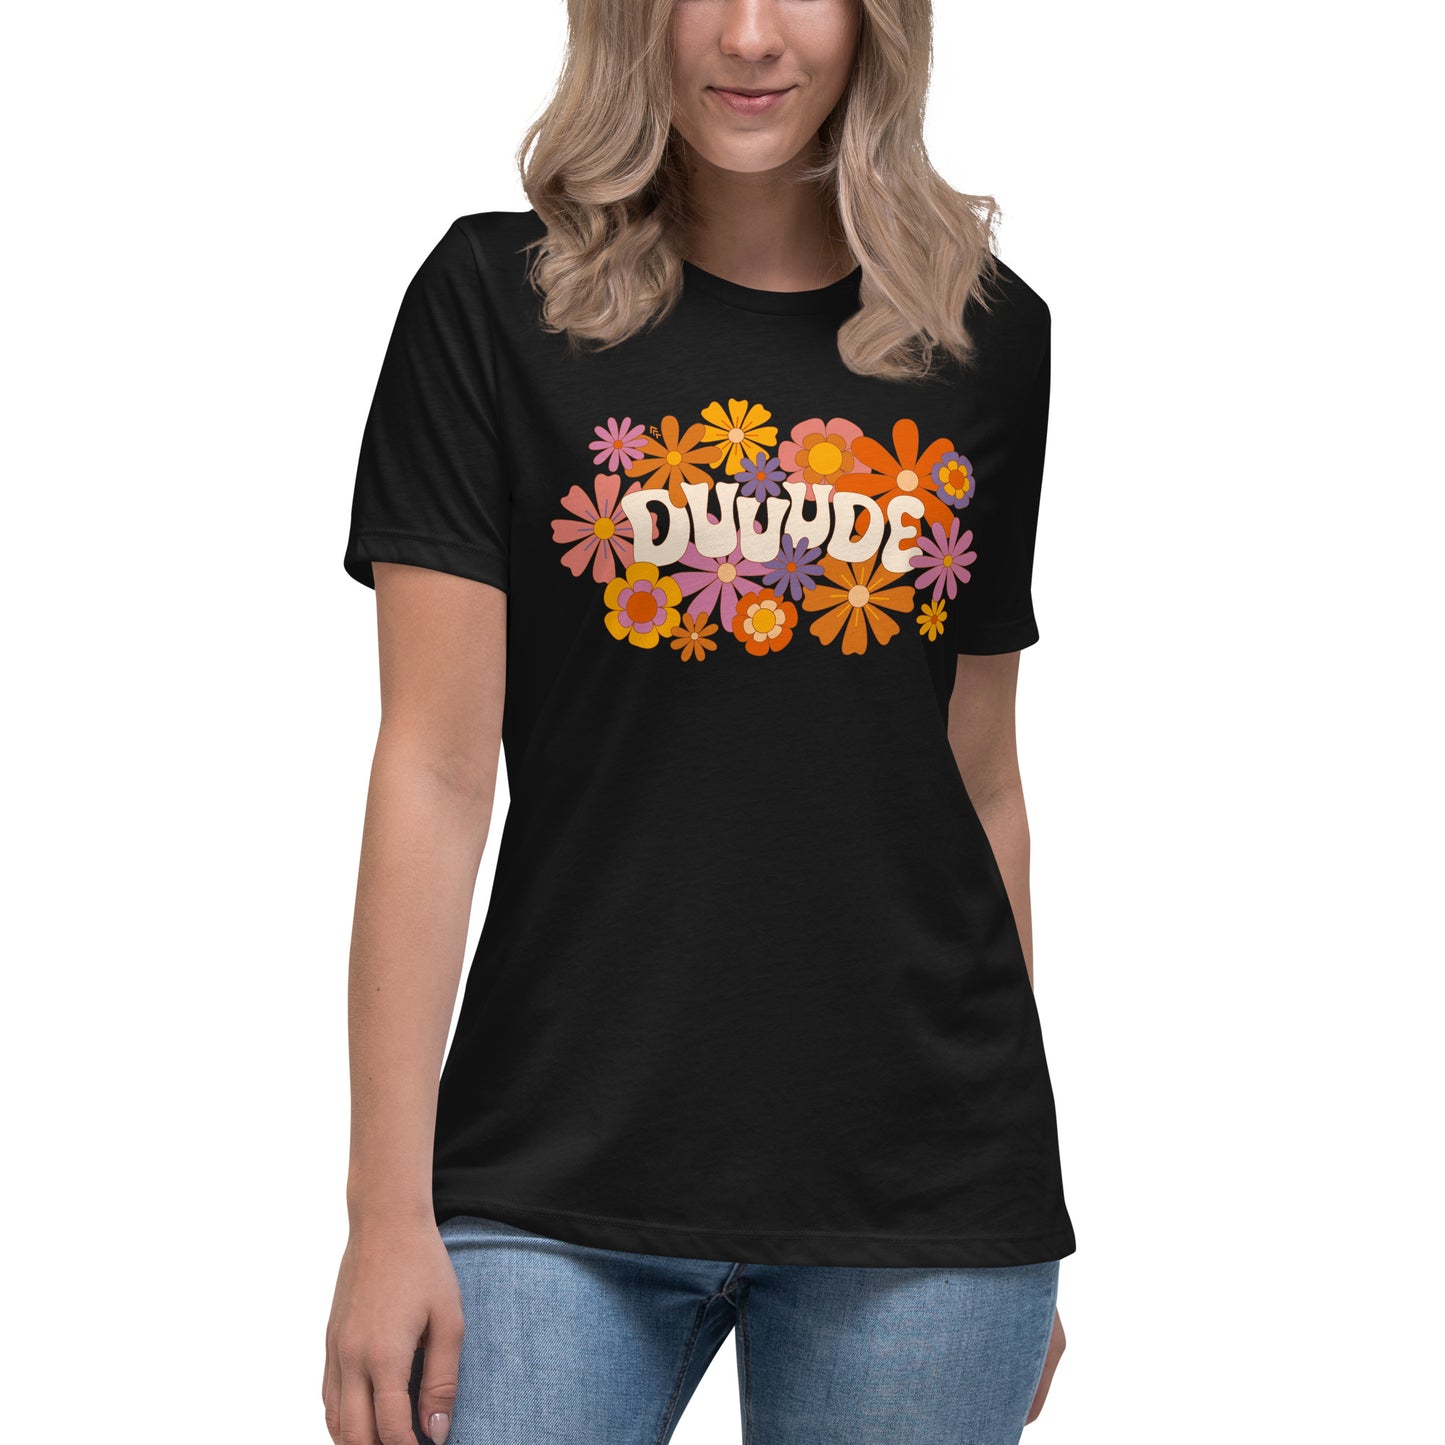 Dude — Women's Relaxed Tee